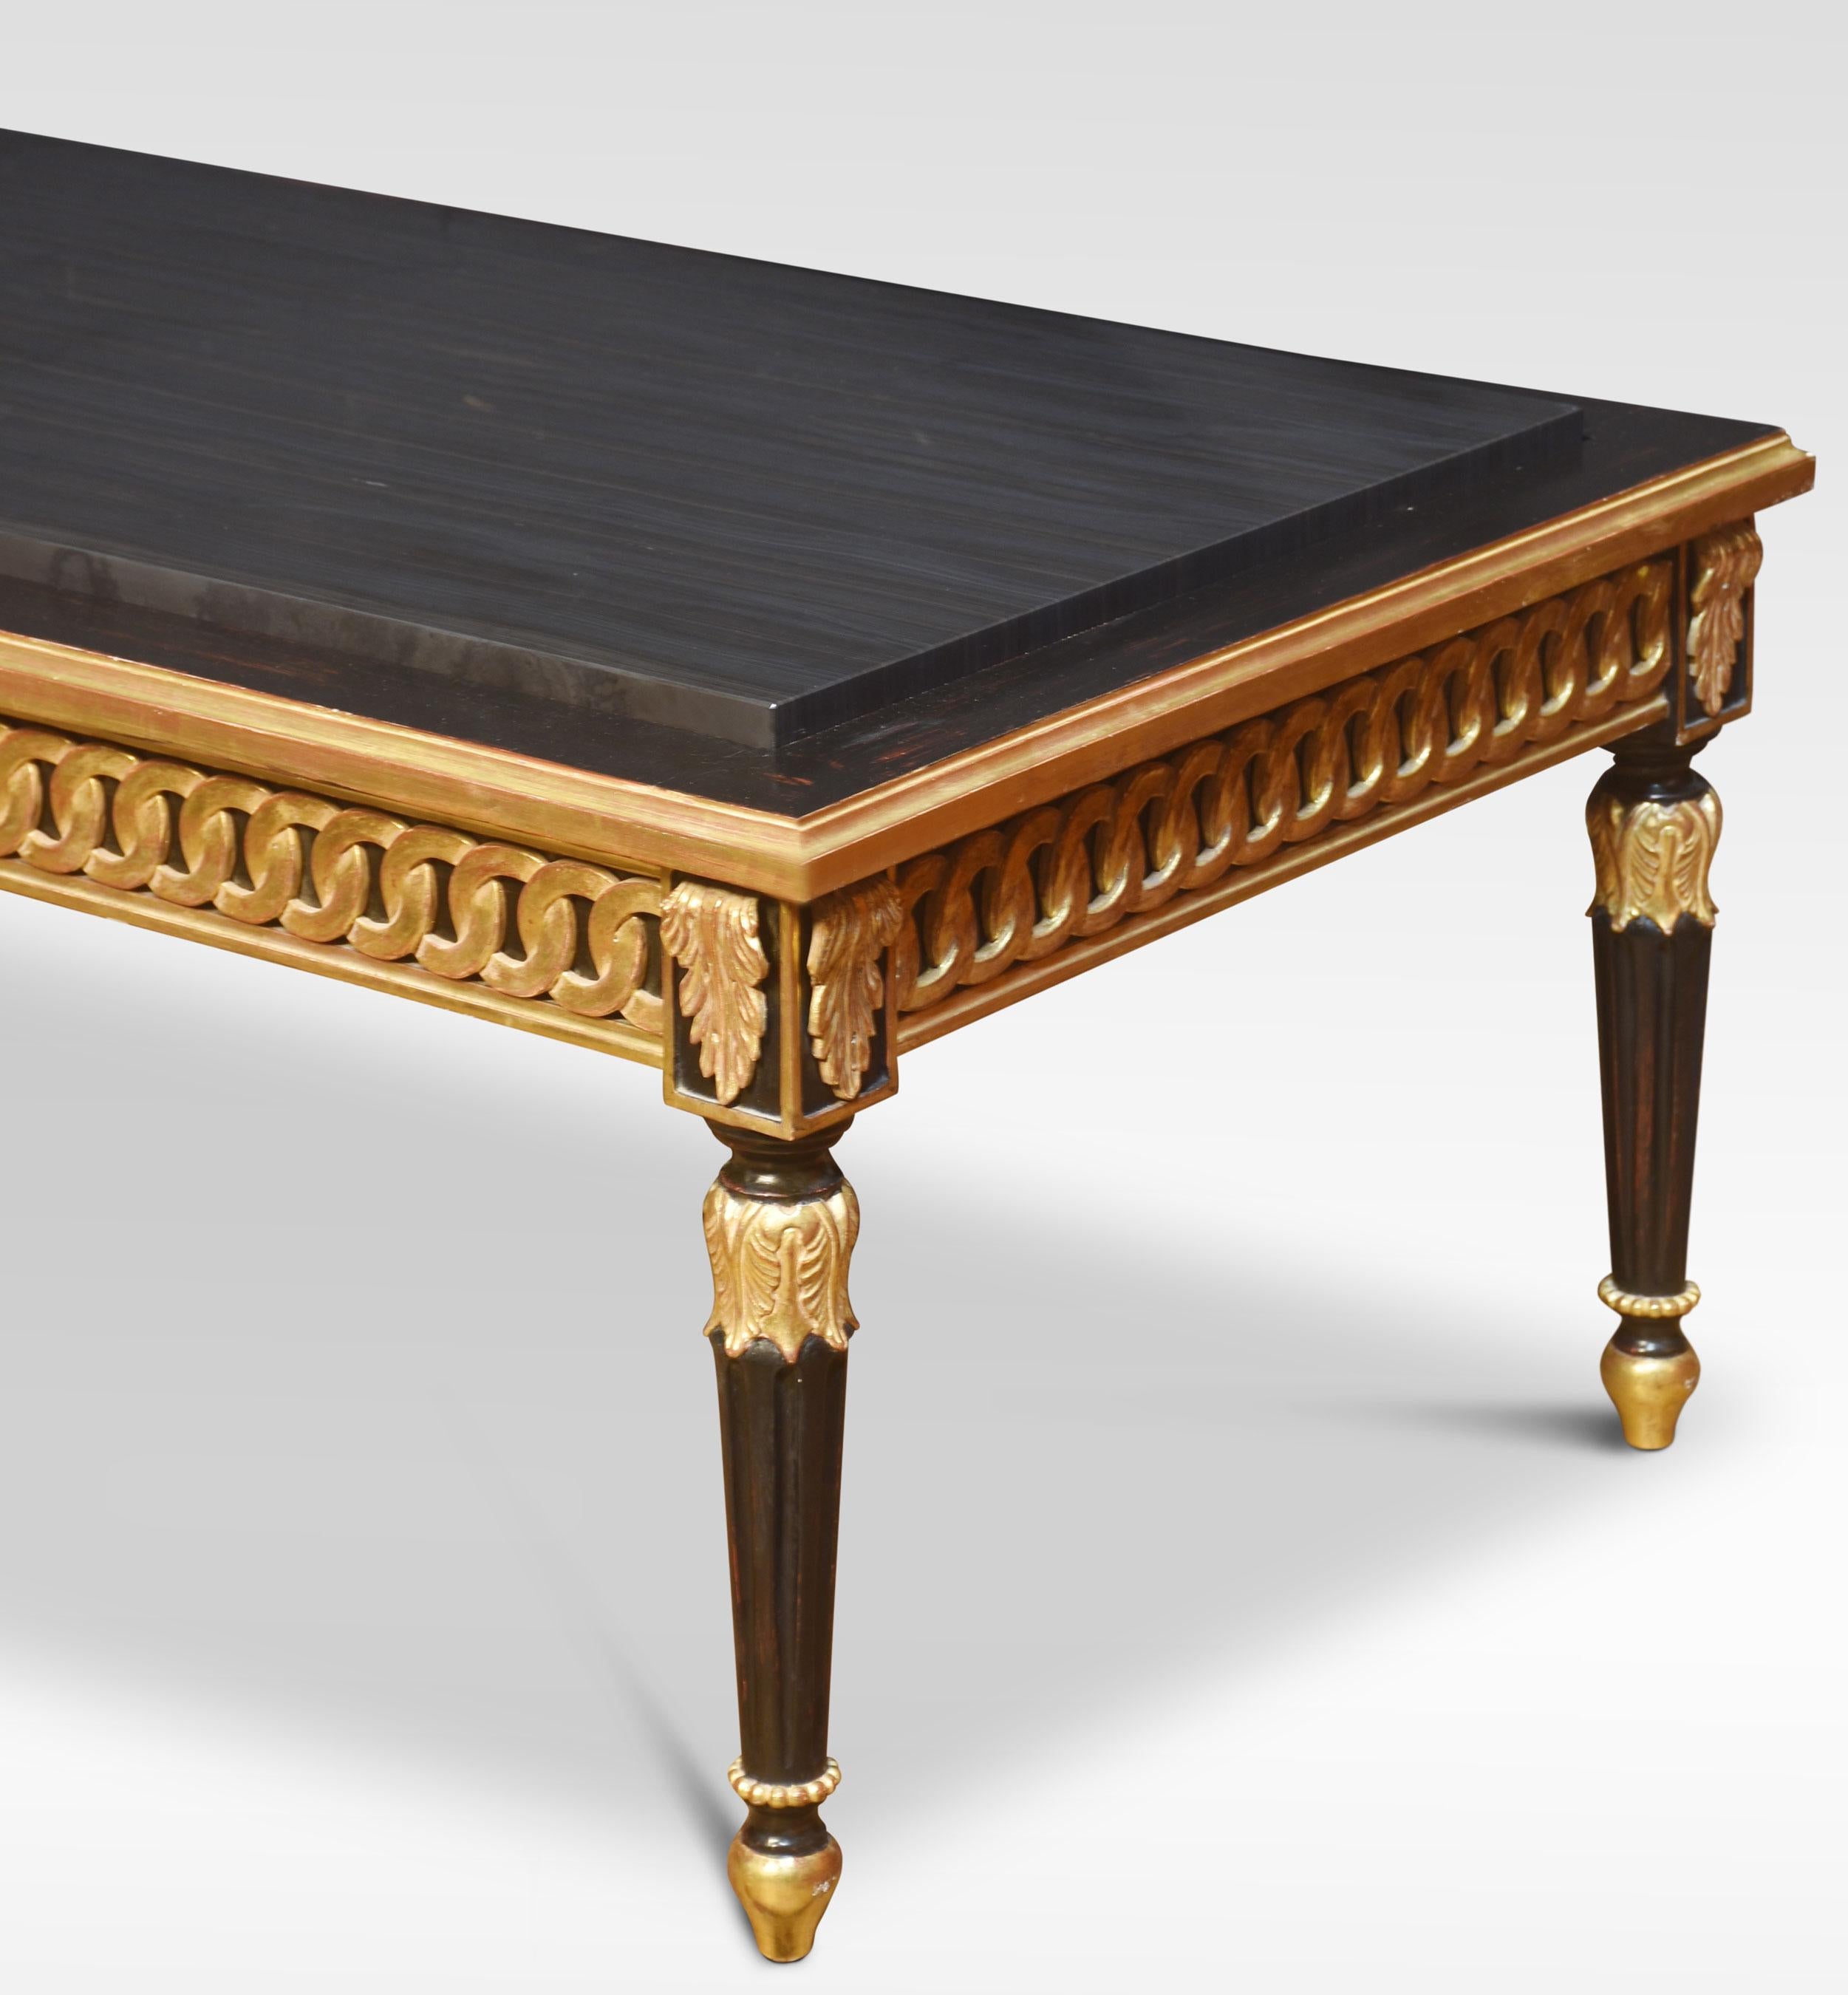 Venetian style coffee table, the large rectangular black veined marble top above ebony and gilt painted base. All raised up on turned reeded tapering legs.
Dimensions
Height 19 Inches
Width 52.5 Inches
Depth 28 Inches